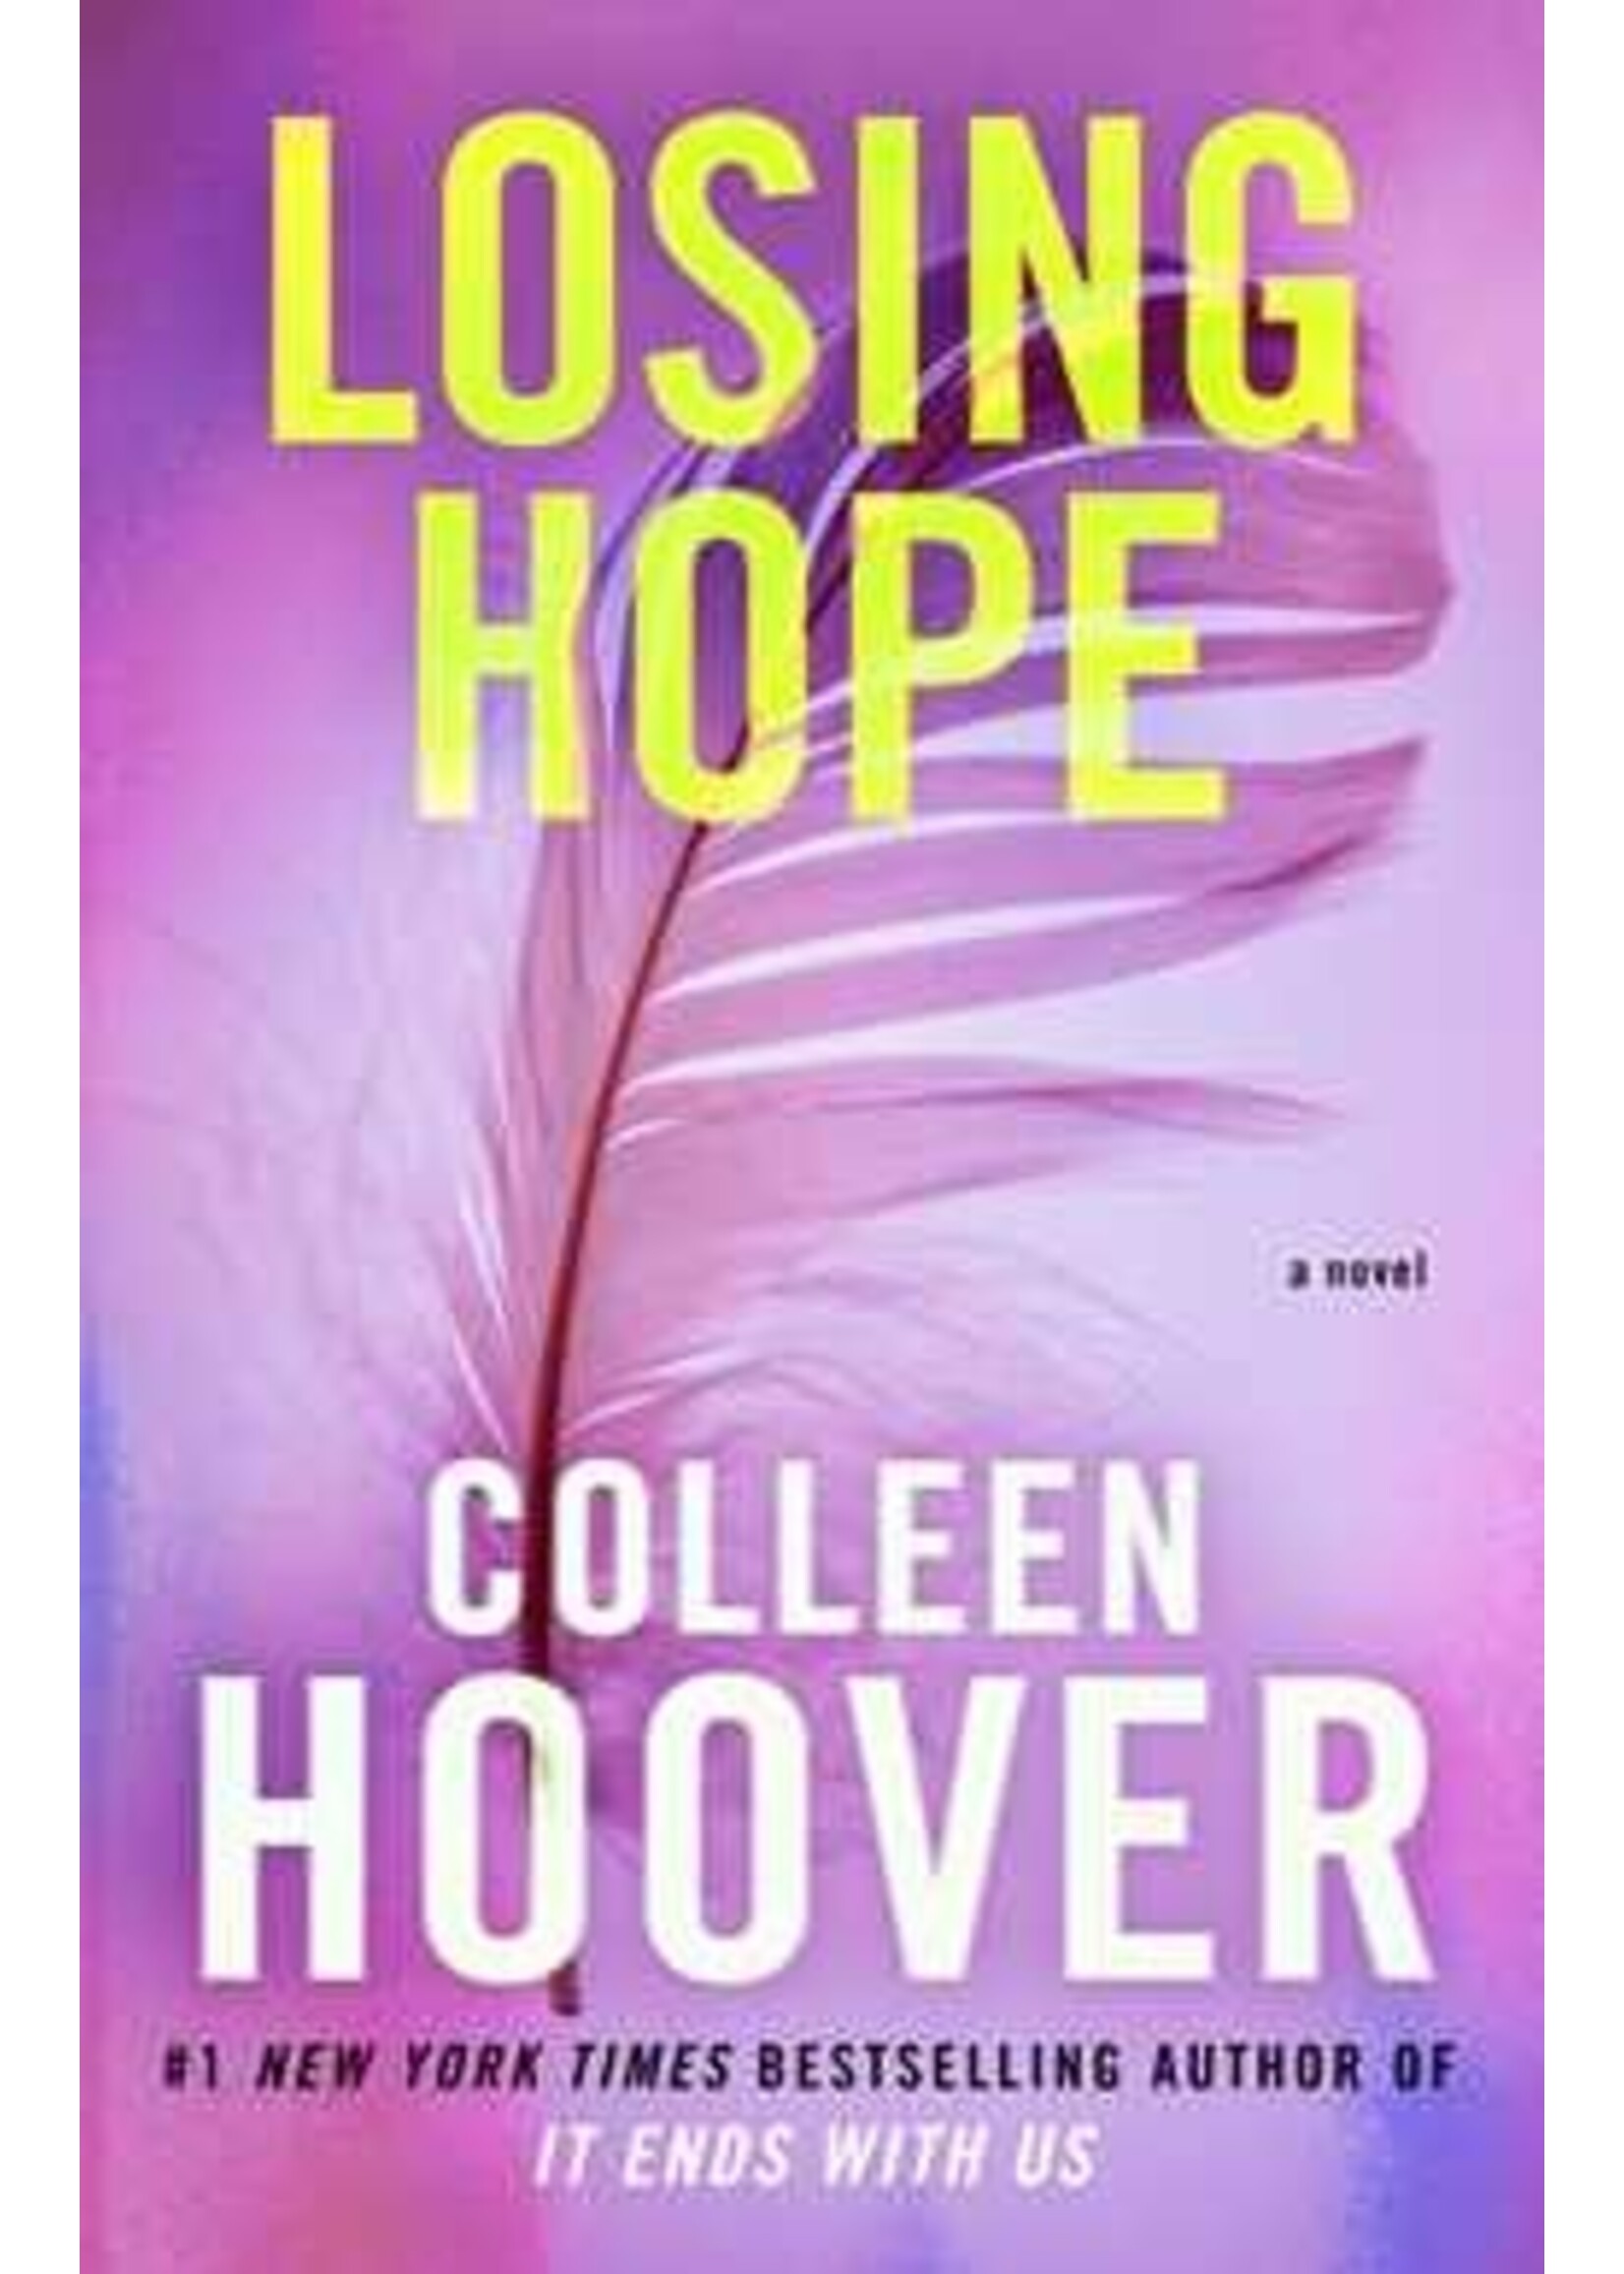 Losing Hope (Hopeless #2) by Colleen Hoover